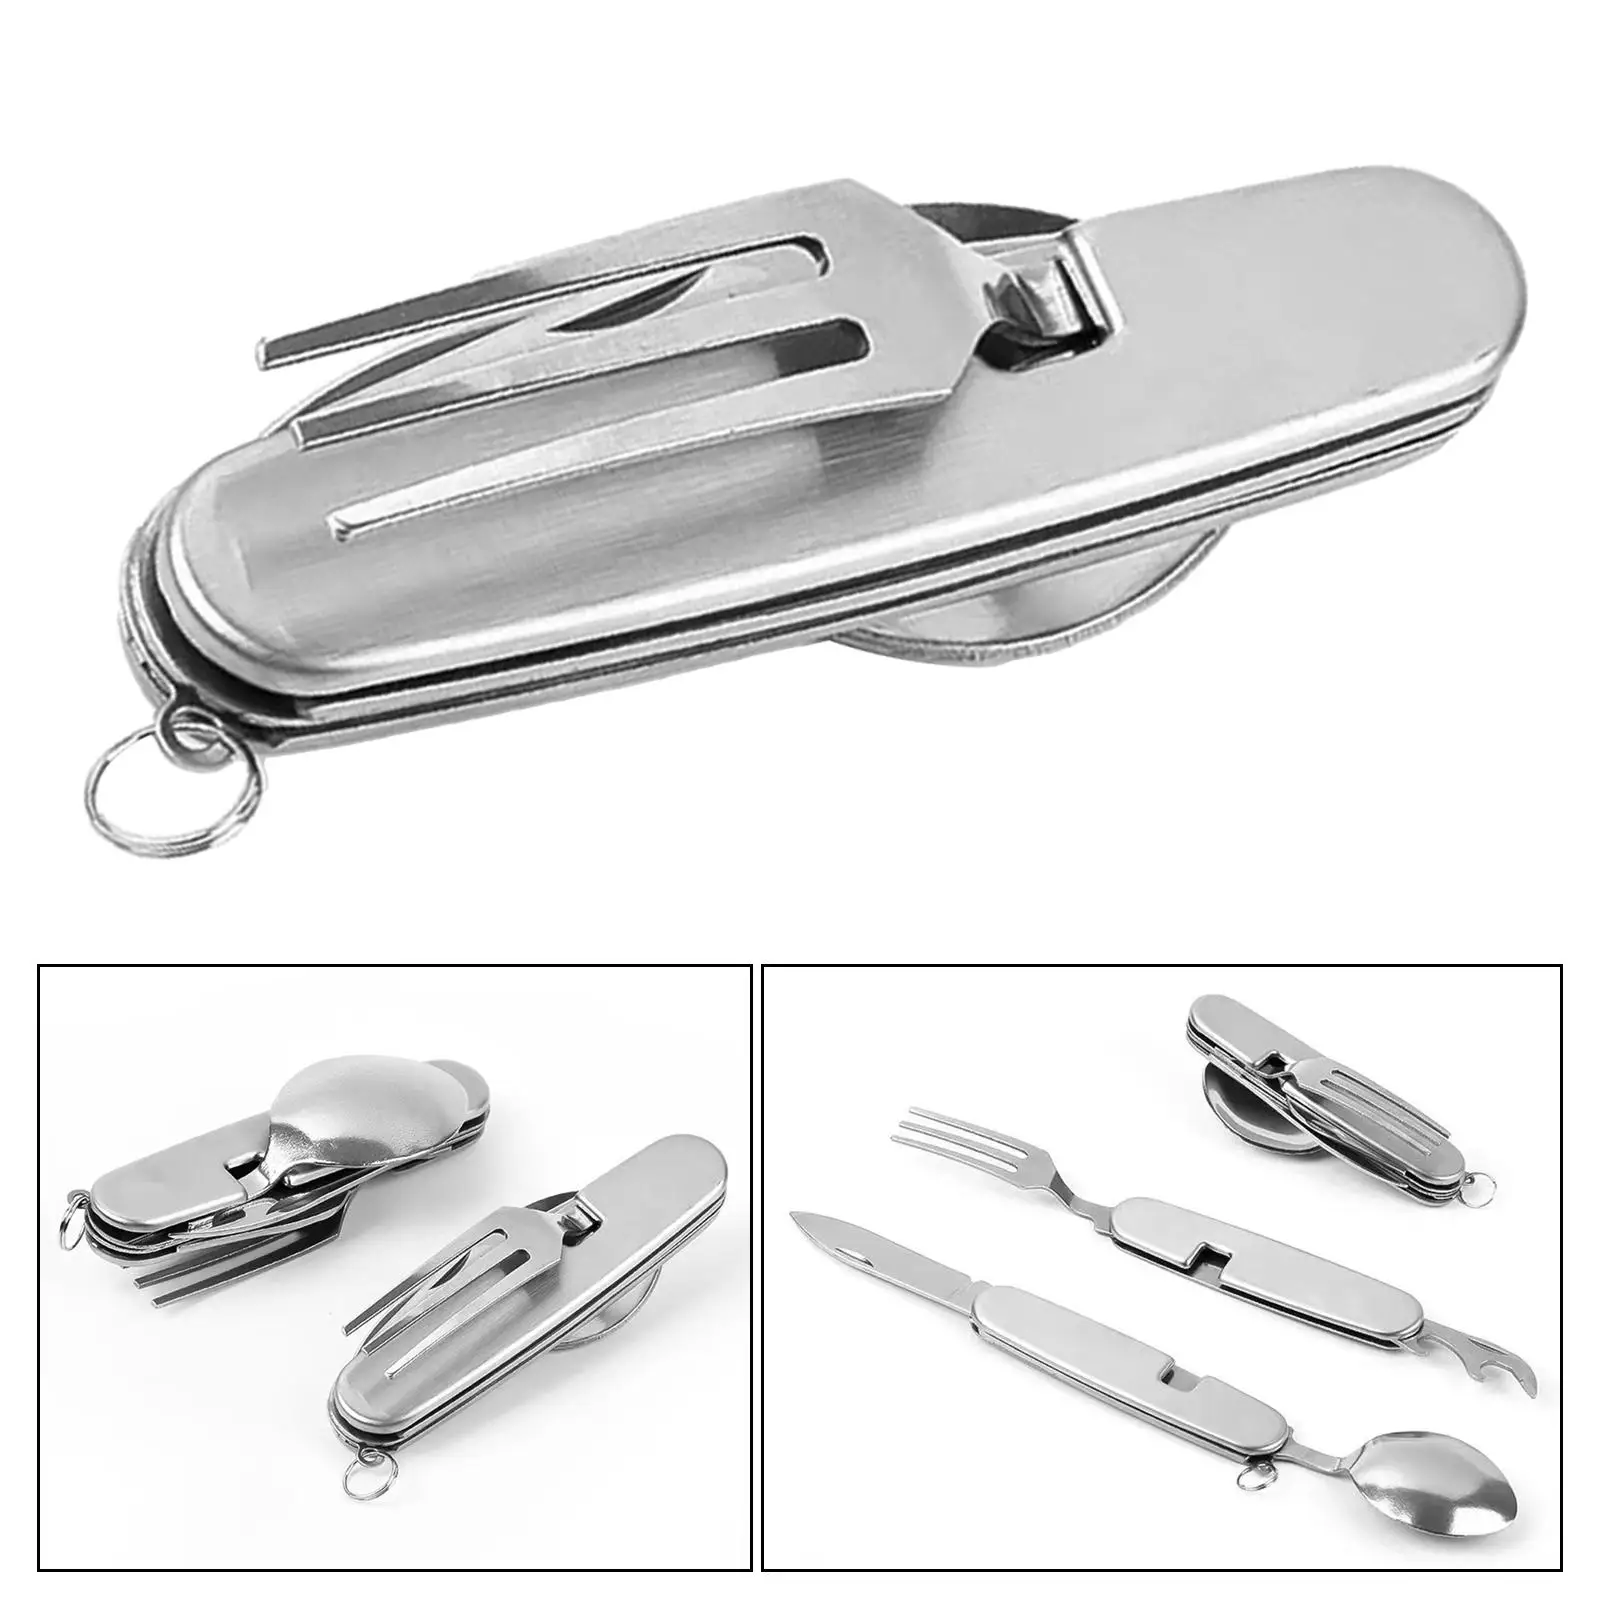 5 in 1 Camping Utensils Folding Stainless Steel Spoon, Fork, Knife, Corkscrew and Can Opener Combo, for BBQ Traveling Cooking